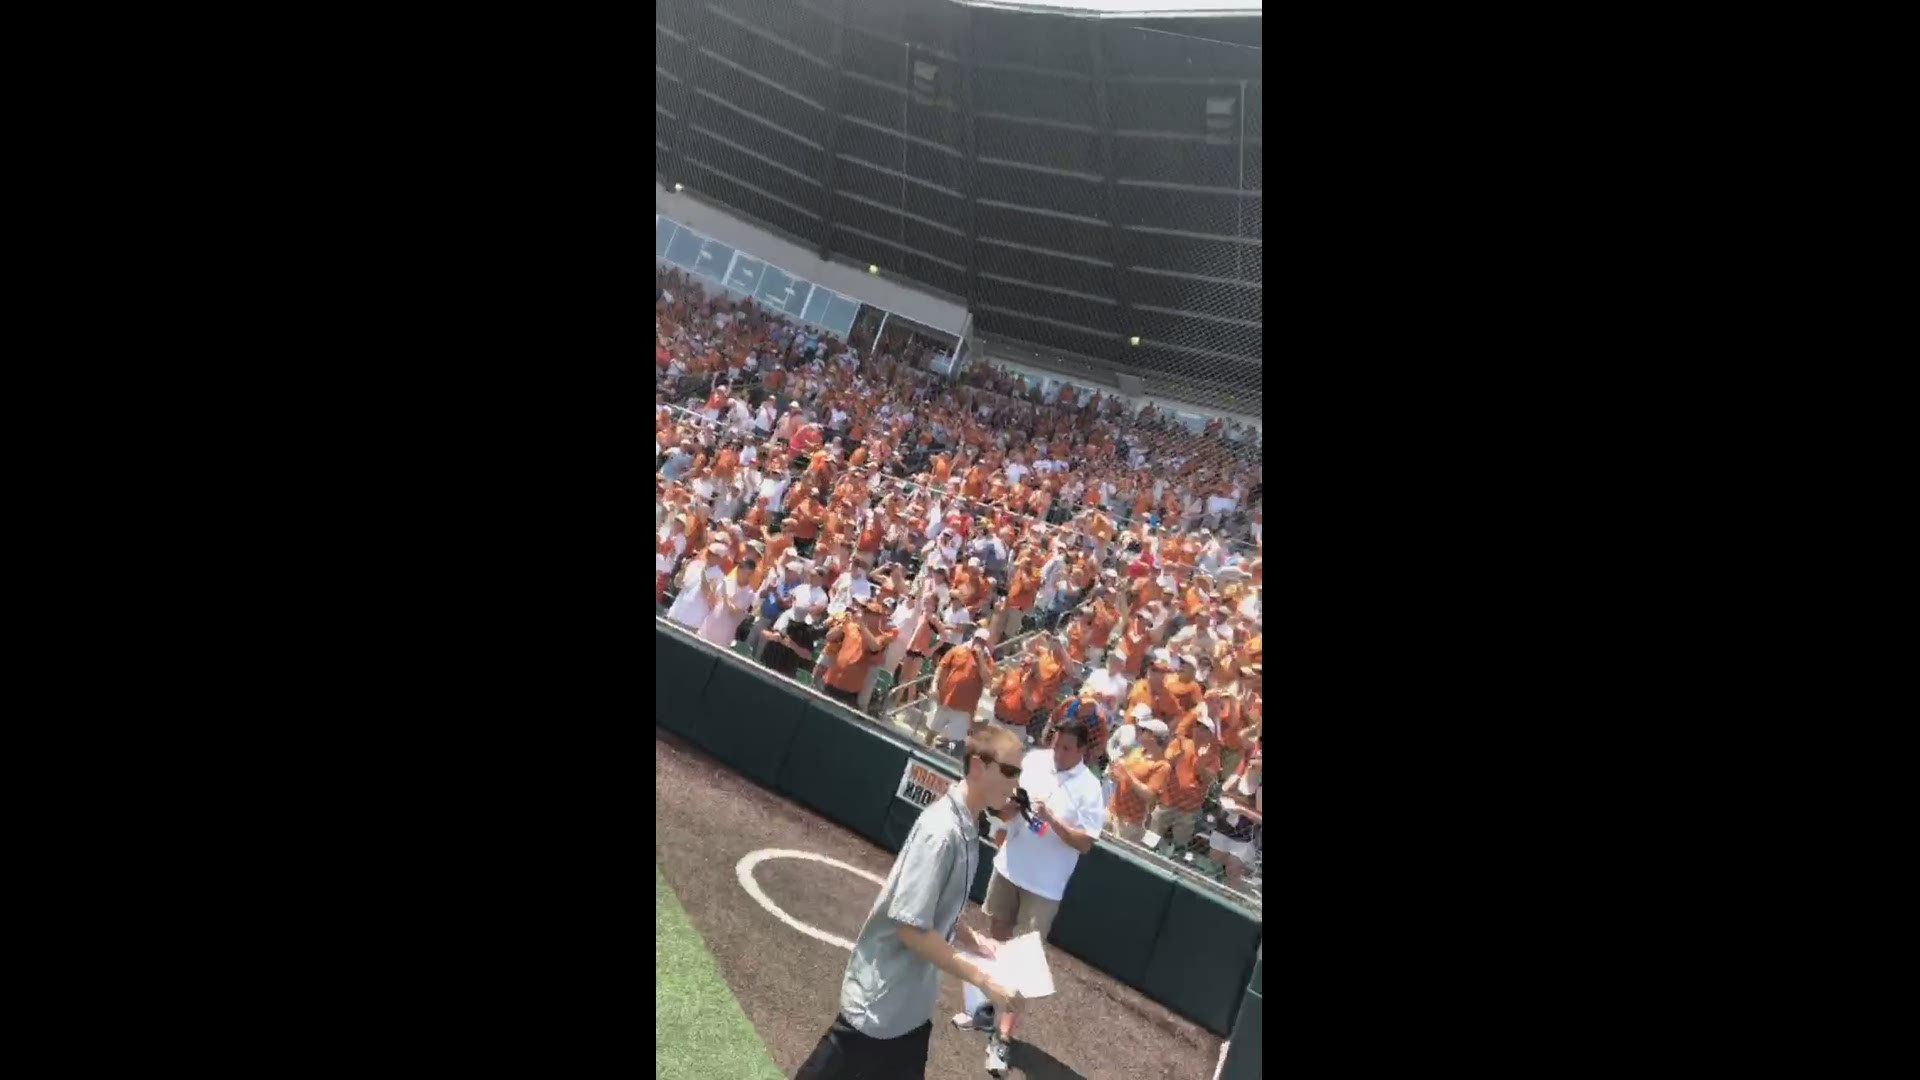 The Texas Longhorns defeated Tennessee Tech in a decisive game three Monday at Disch-Falk field. The win sends the Longhorns to Omaha for the 36th time in program history. KVUE's Shawn Clynch captured the celebration.